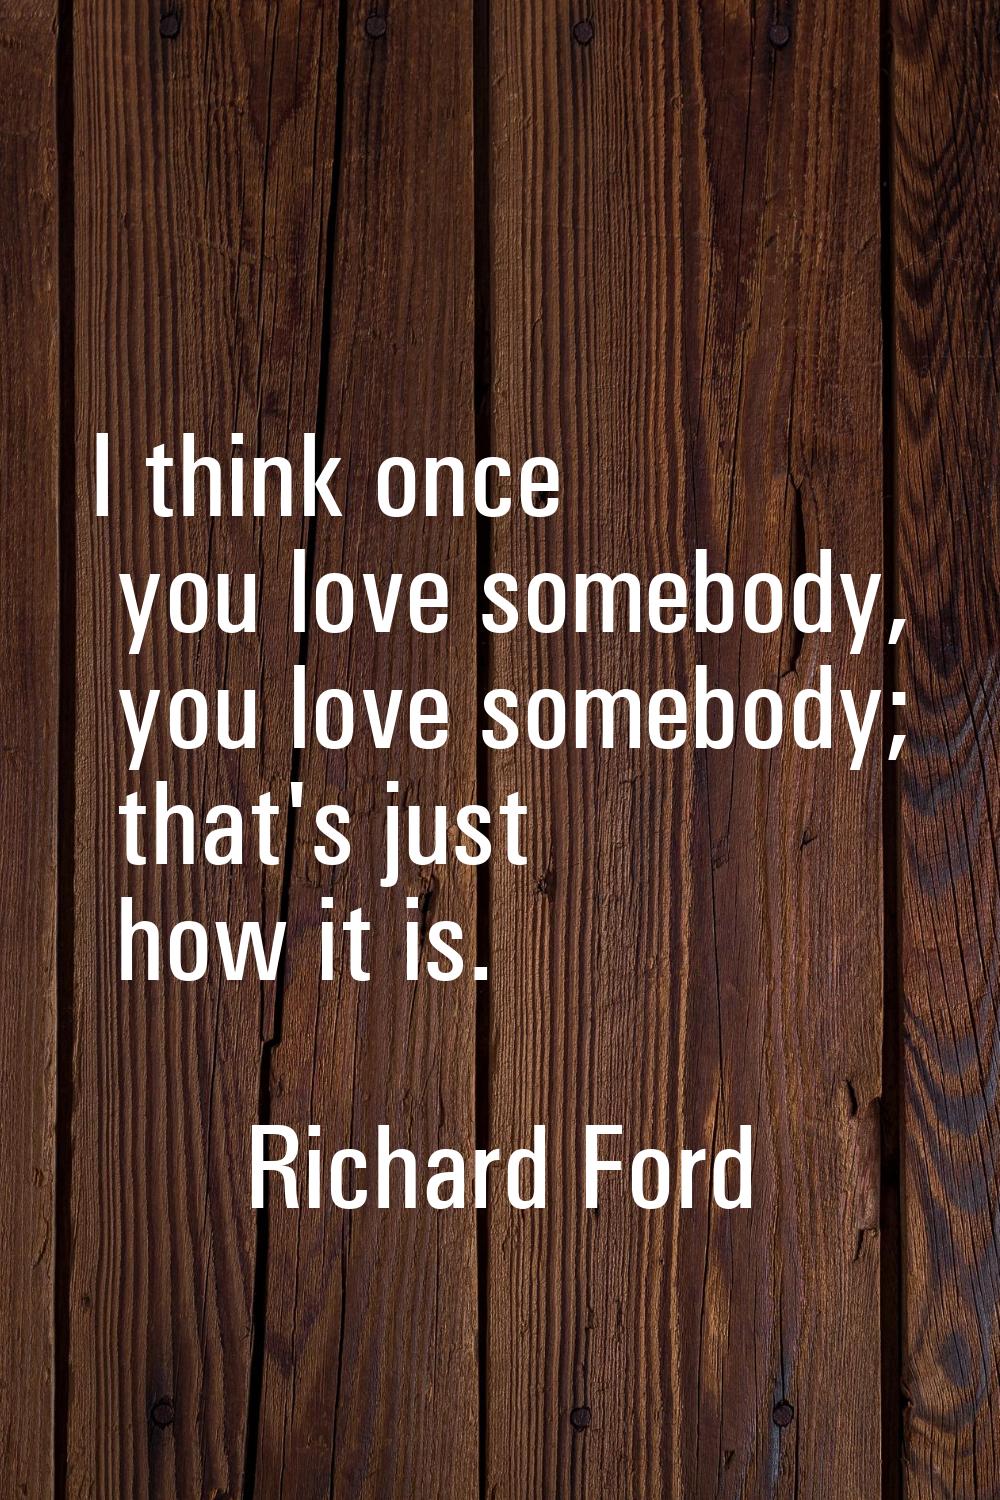 I think once you love somebody, you love somebody; that's just how it is.